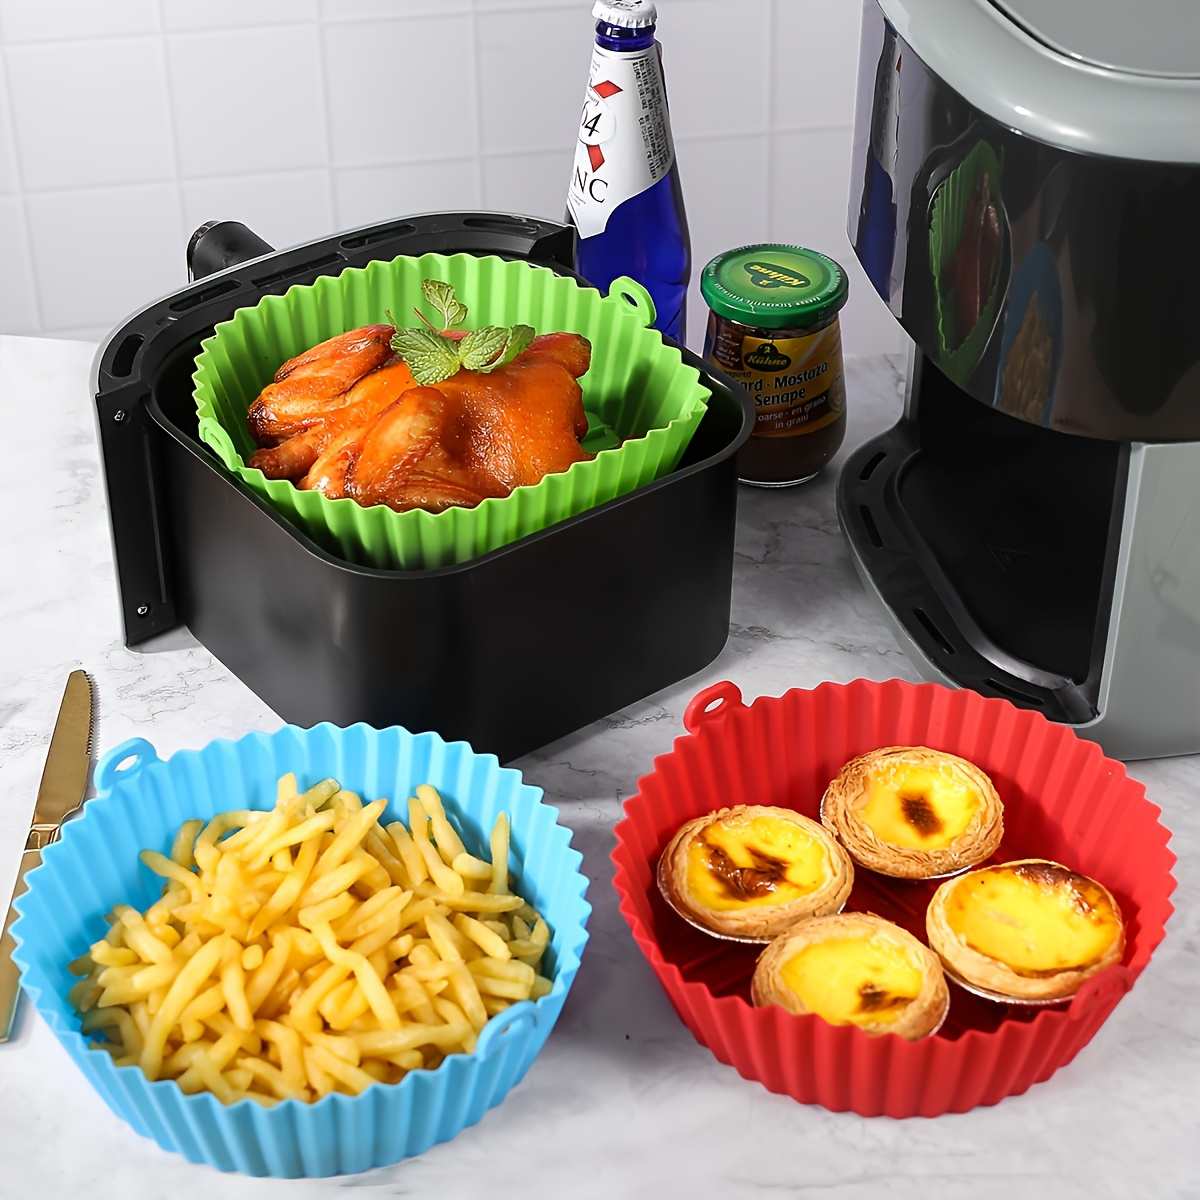 

3/4/5pcs Reusable Silicone Air Fryer Liners - 3-5 Qt Capacity - Flame-resistant And Easy To Clean - Red And Blue - Oven-safe Accessories